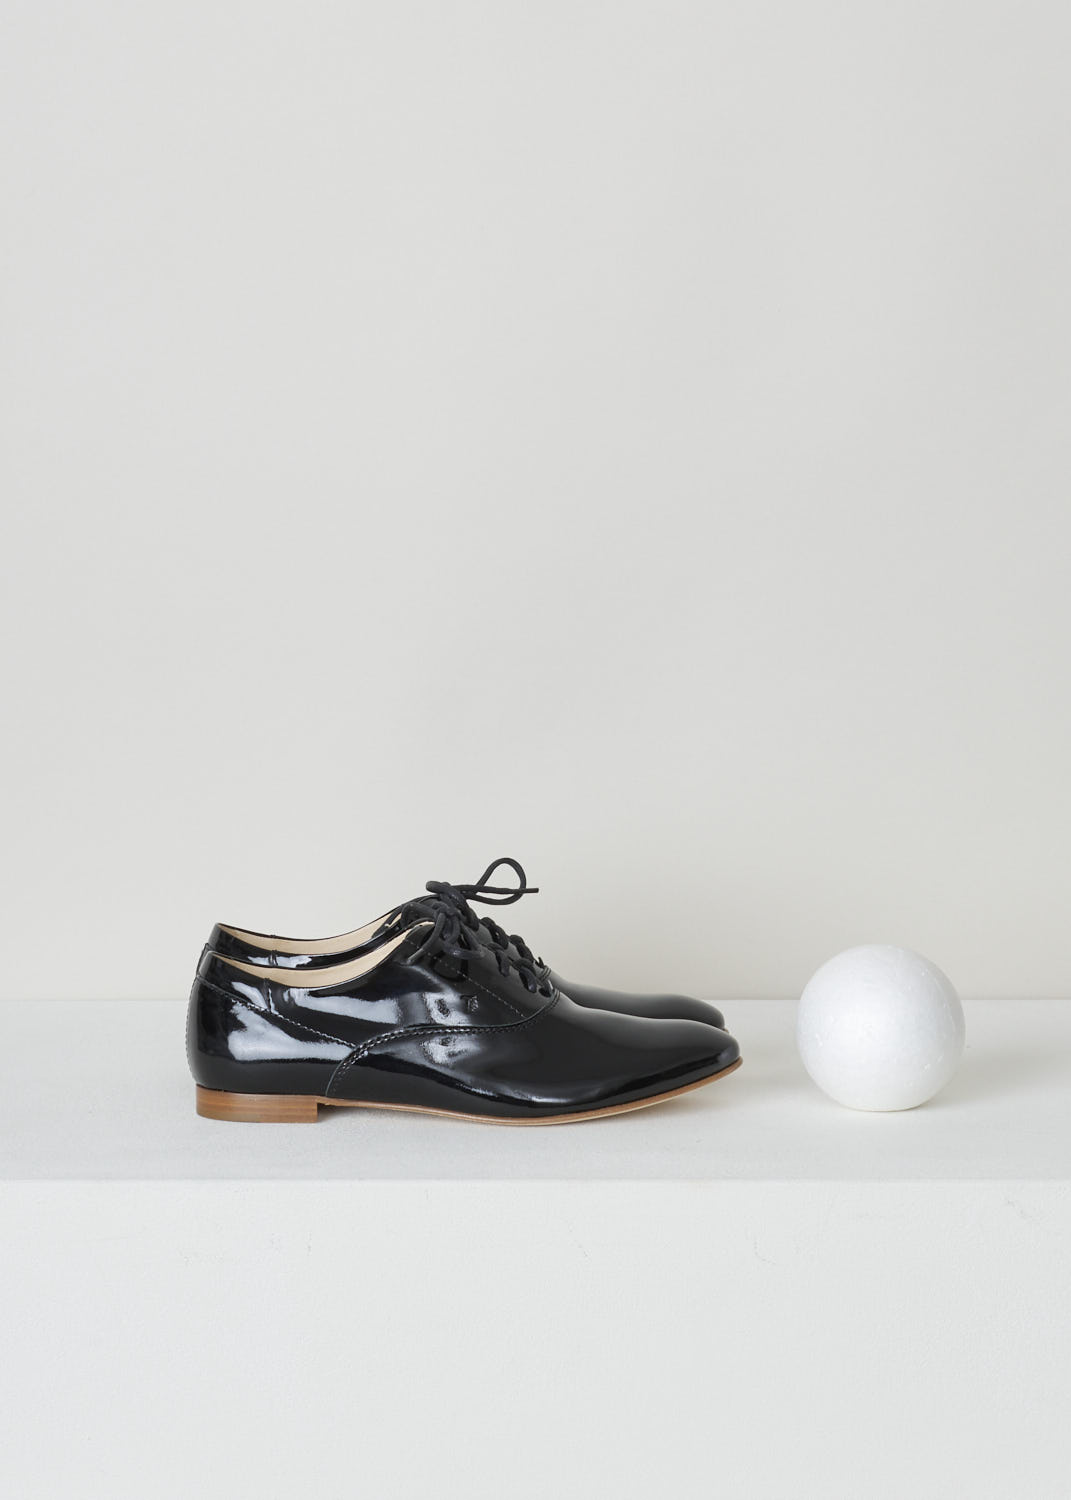 TODS, BLACK PATENT LEATHER OXFORD SHOES, XXW0QT00NN50OW0B999, Black, Side, Black patent leather Oxford shoes. This model has a rounded toe. The shoes have classic black laces. The sole is a beige color. 